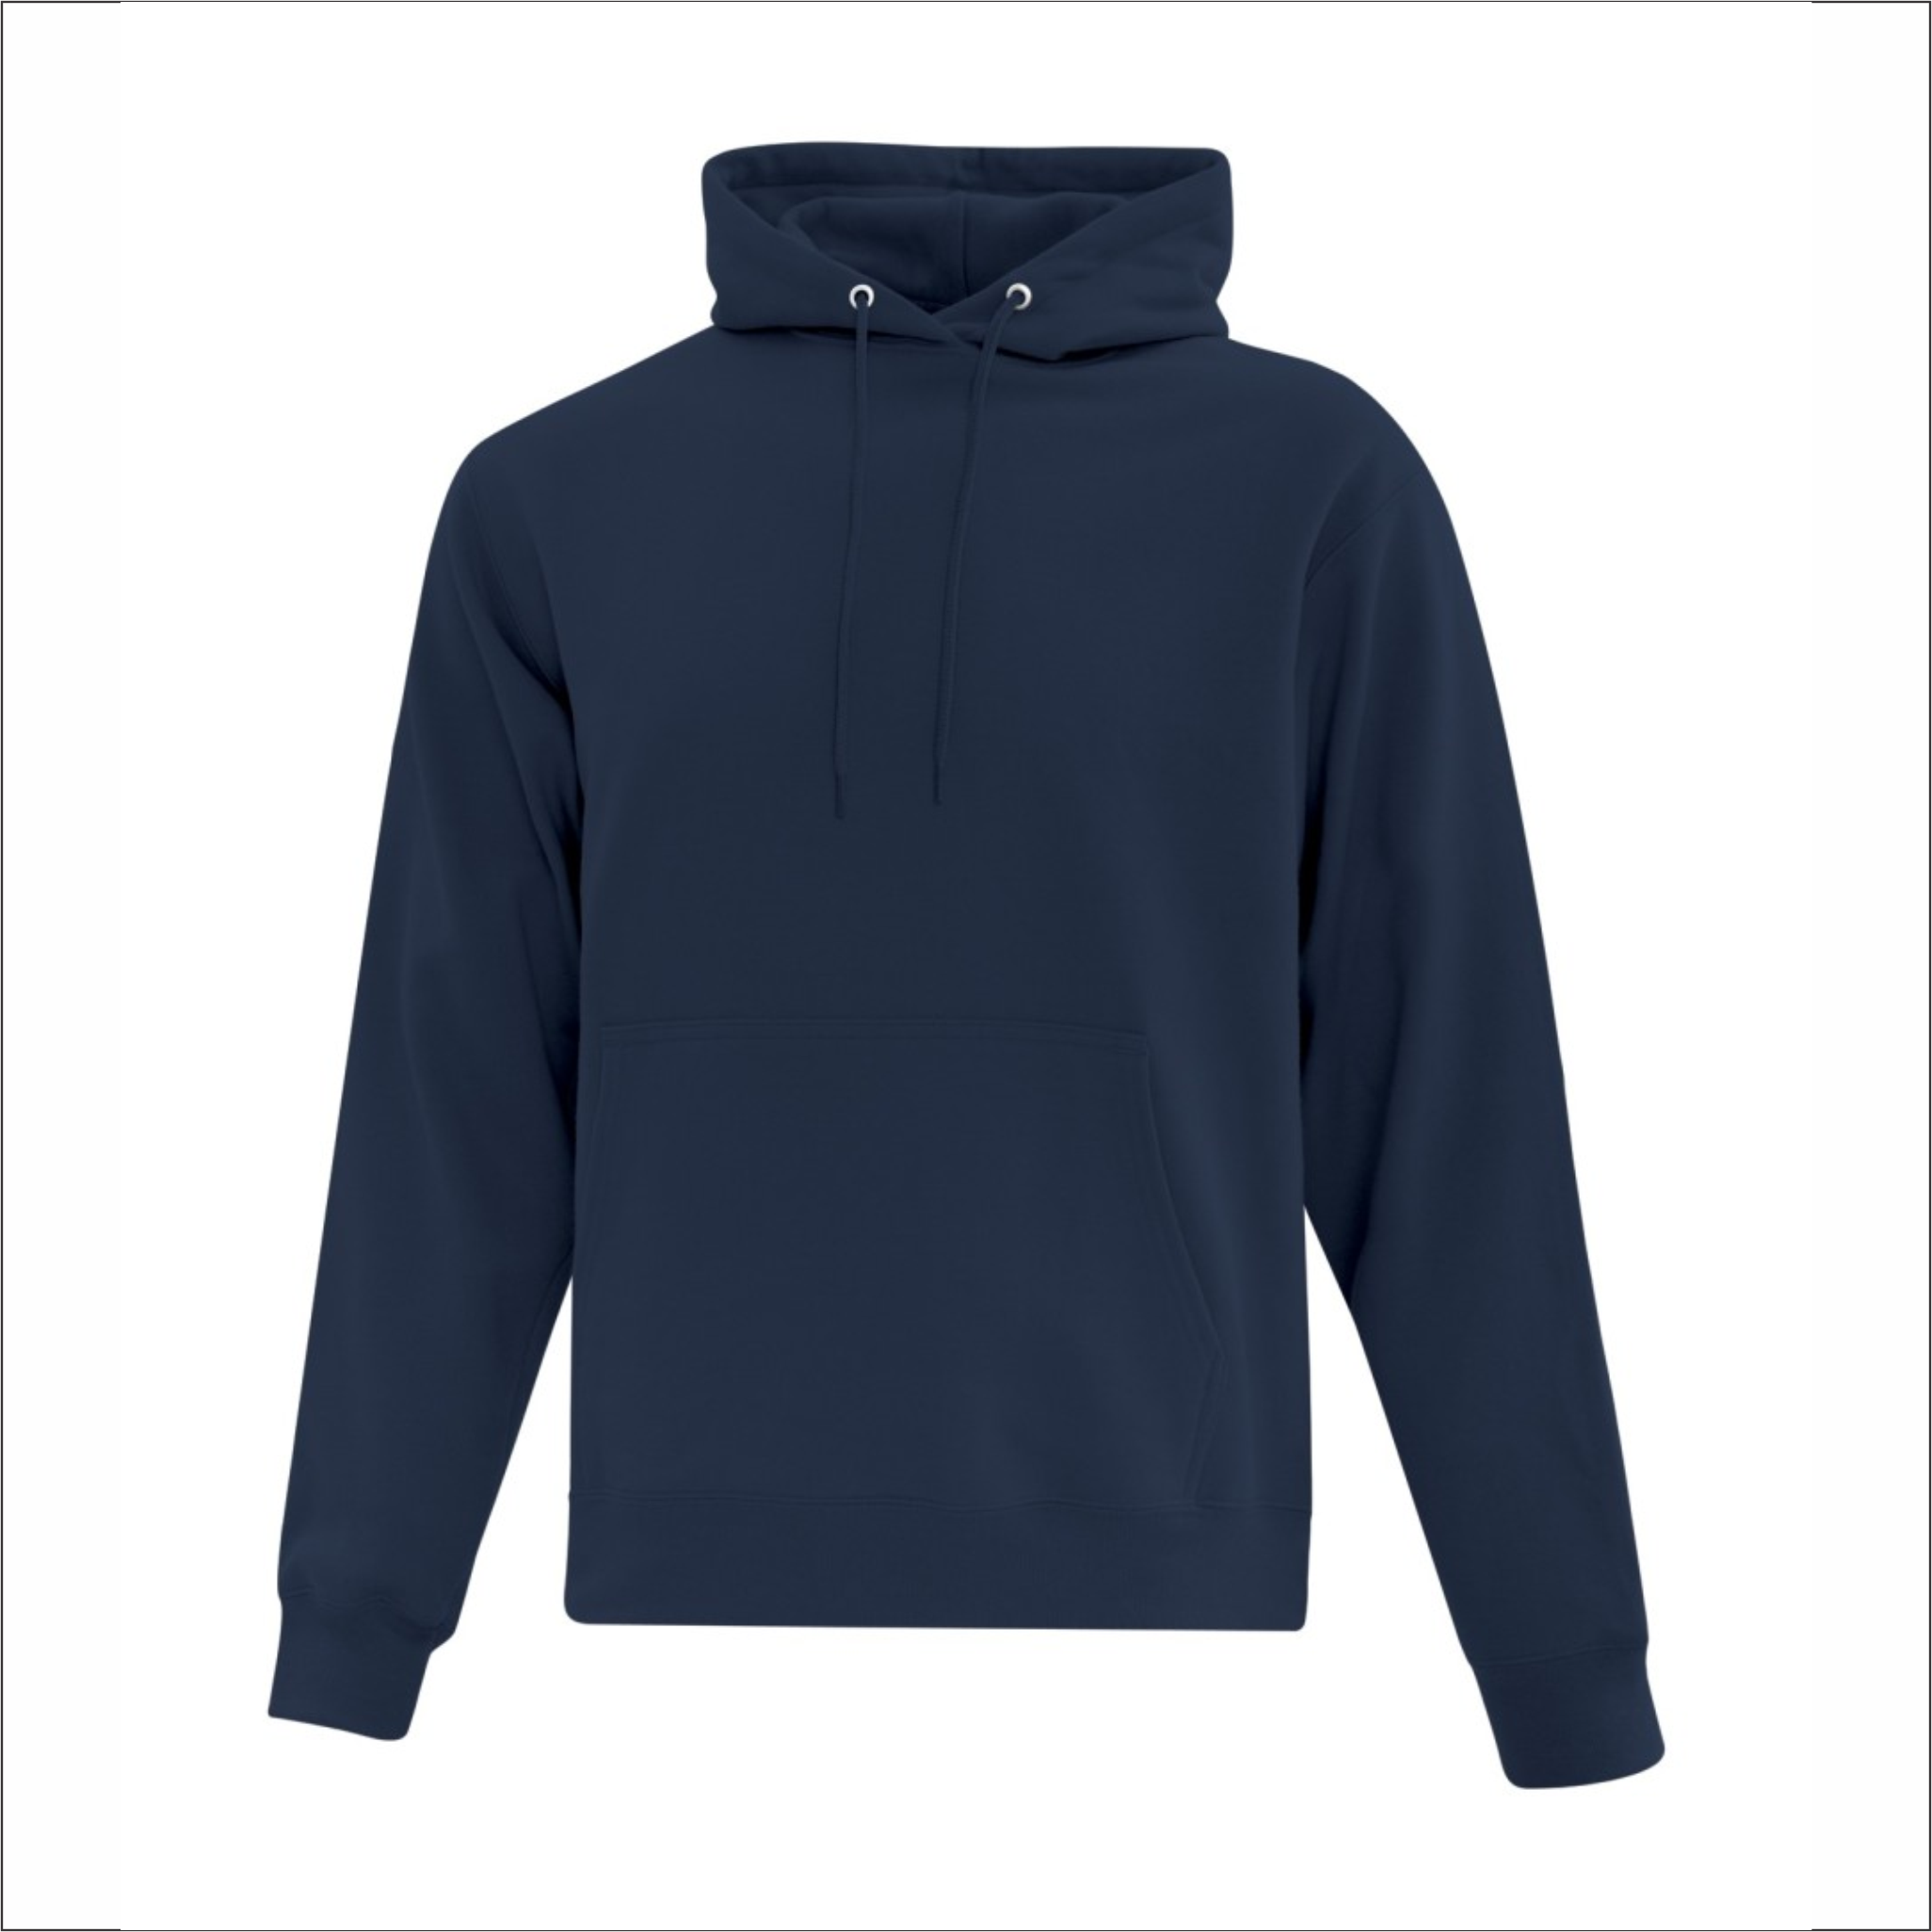 Navy Products Adult Hoodie - Cotton/Polyester - ATC F2500